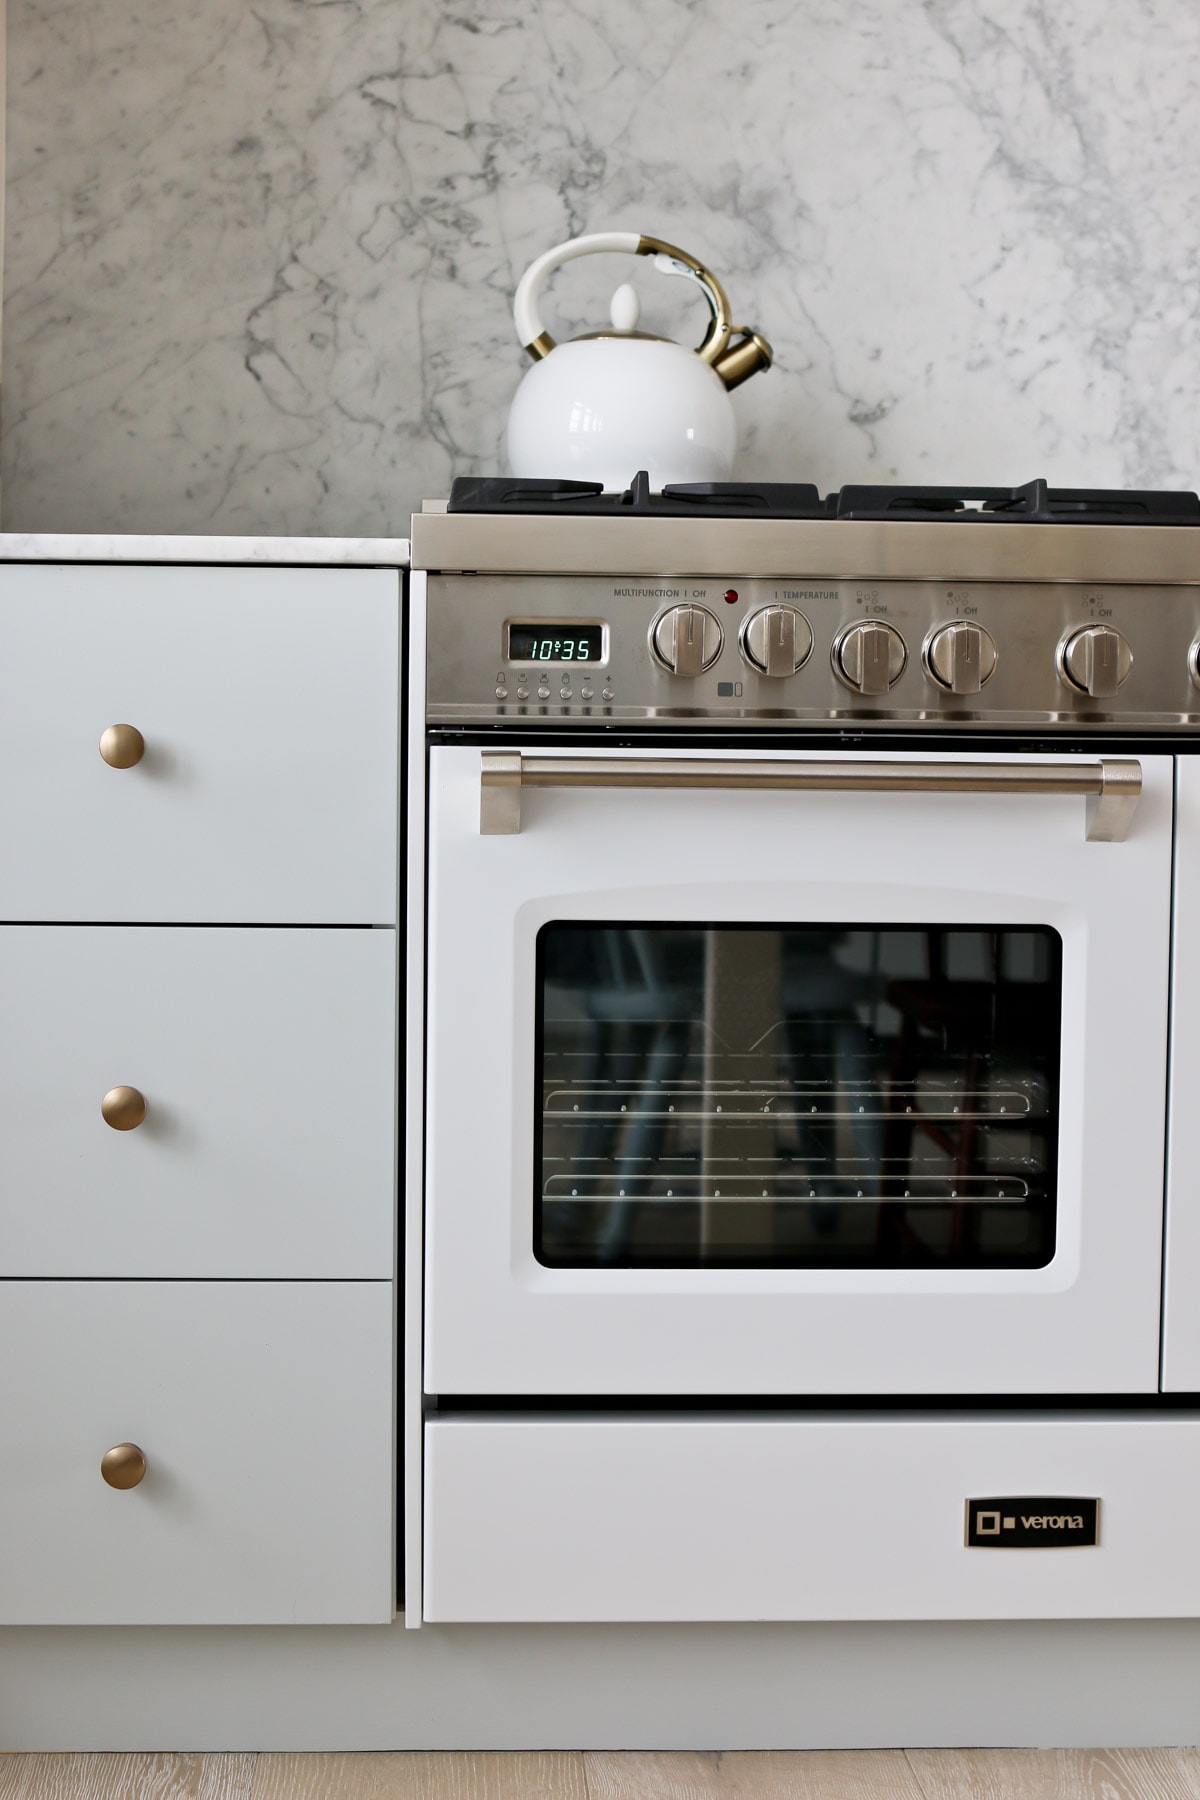 verona stove with white kettle on top beside white kitchen drawer